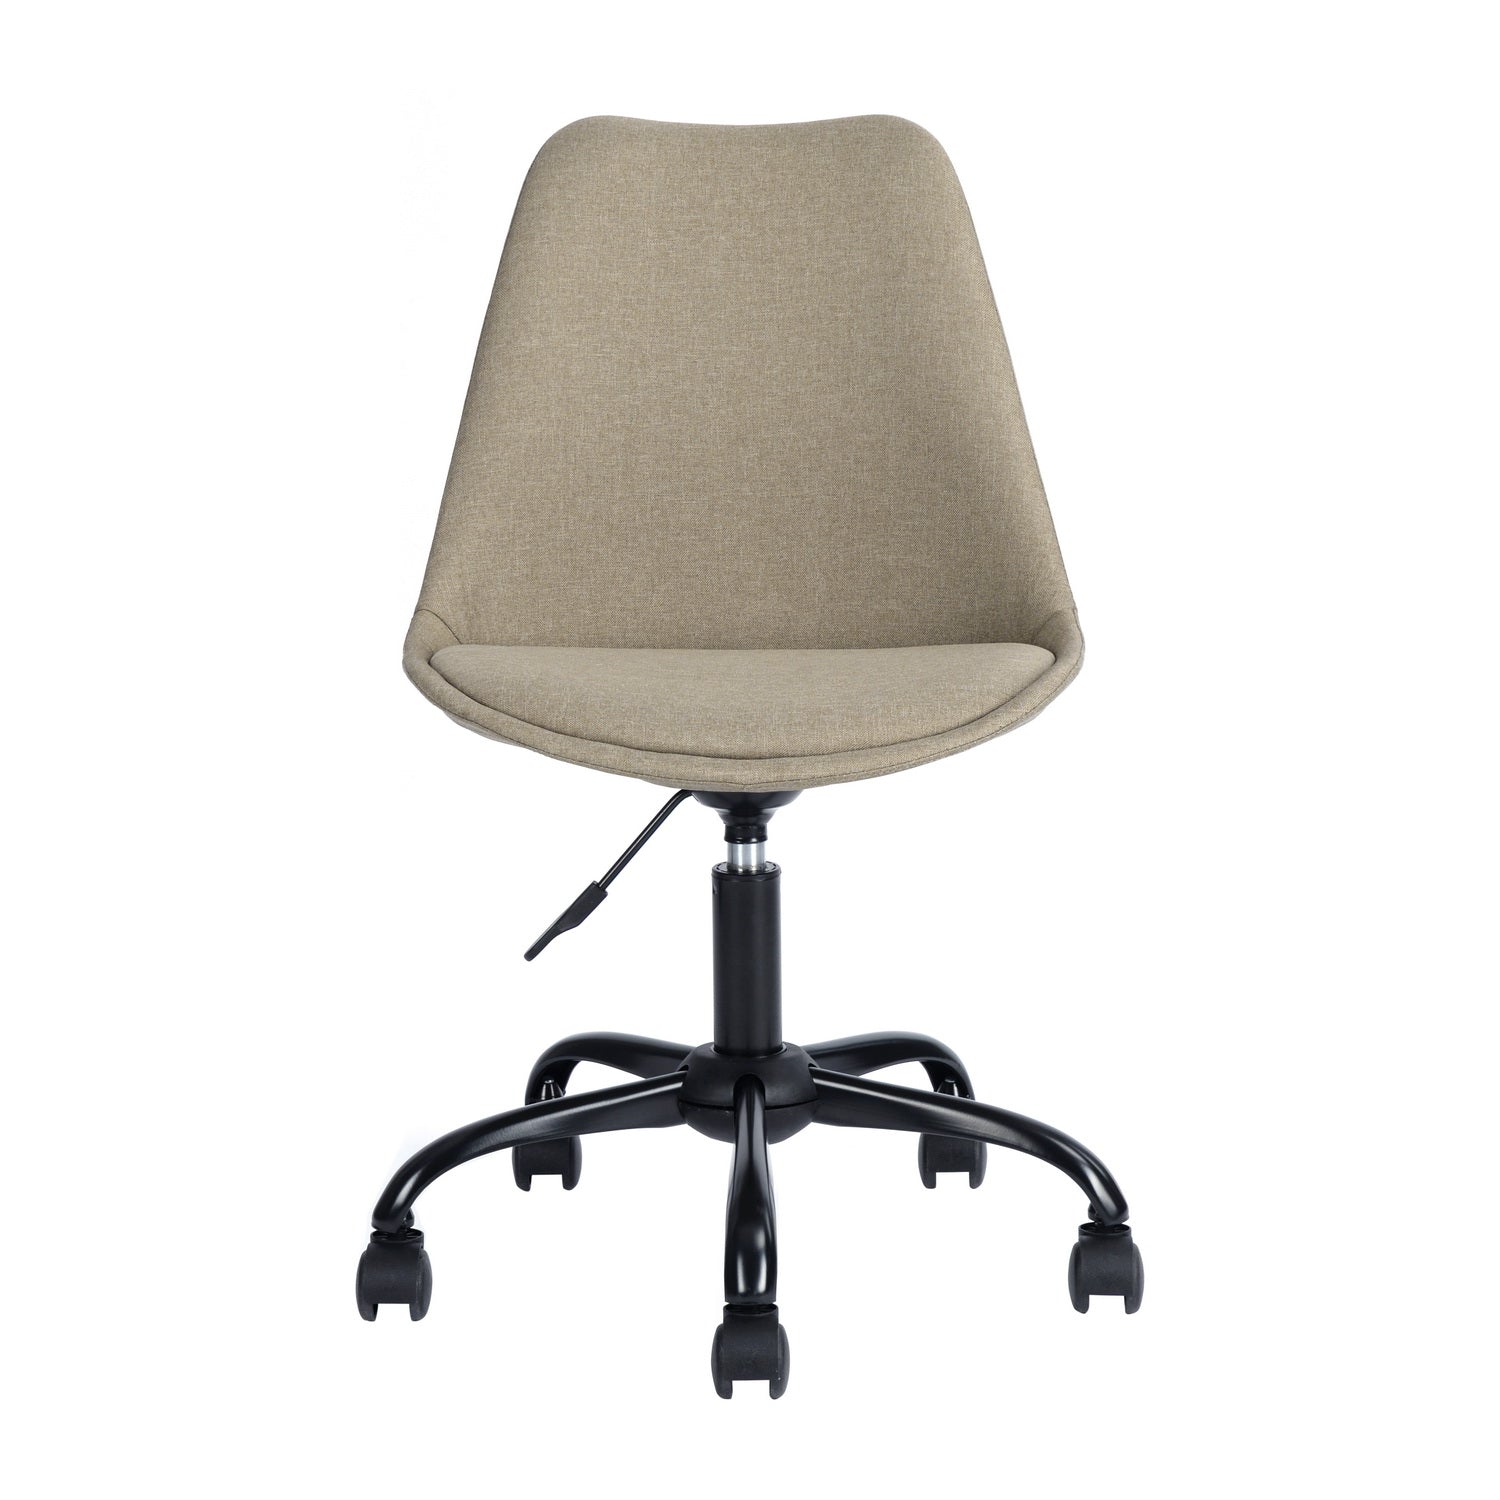 Higos Fabric Beige Office Chair